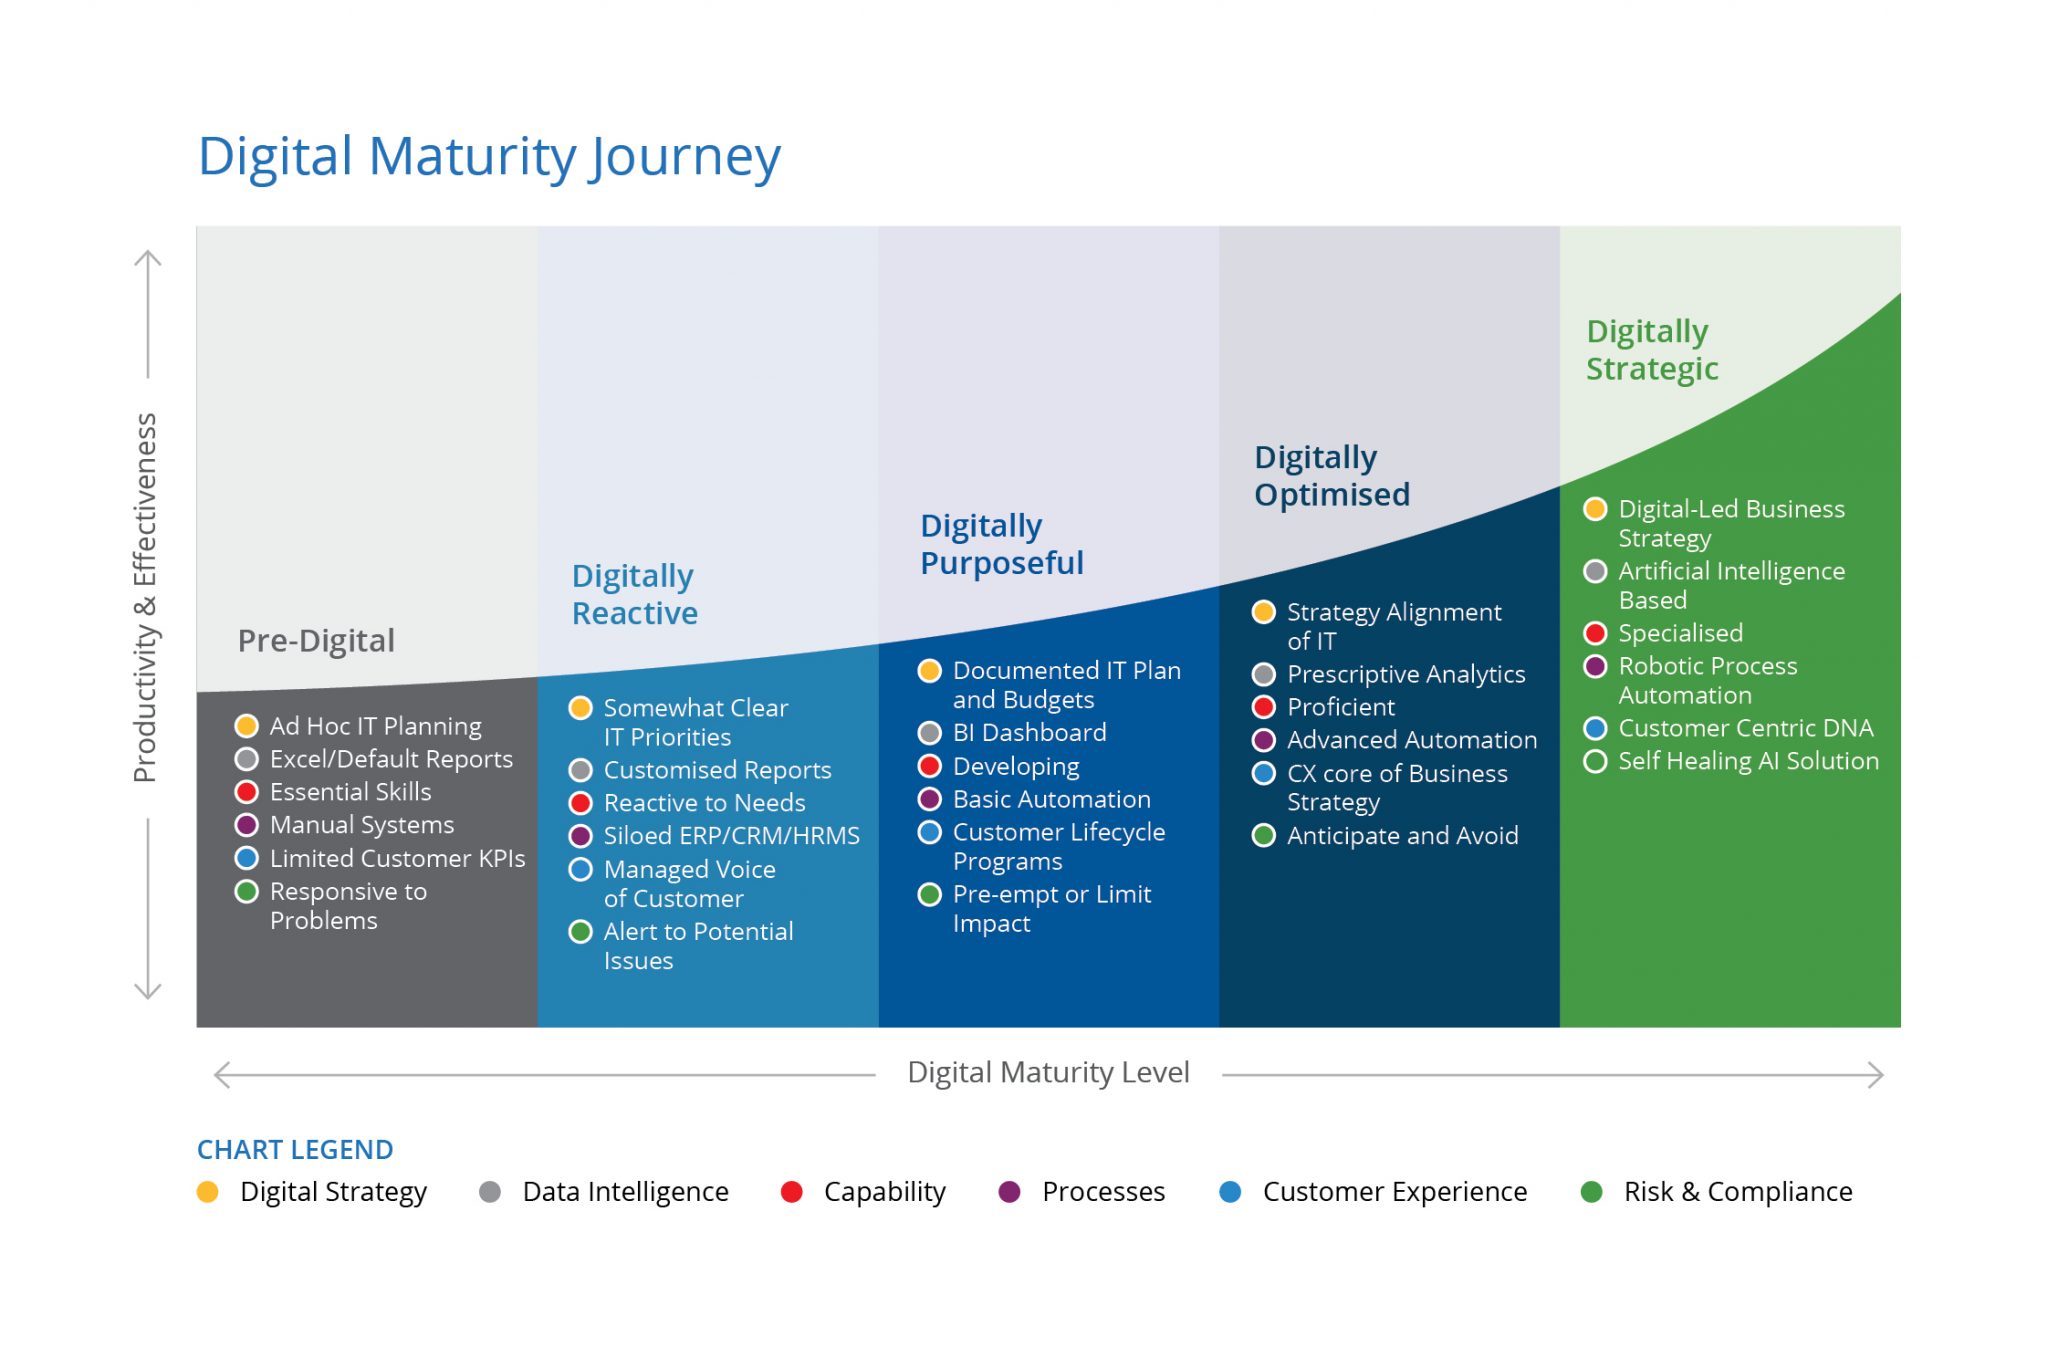 Your Digital Maturity Score - What Does it Mean to Be Digitally Reactive?